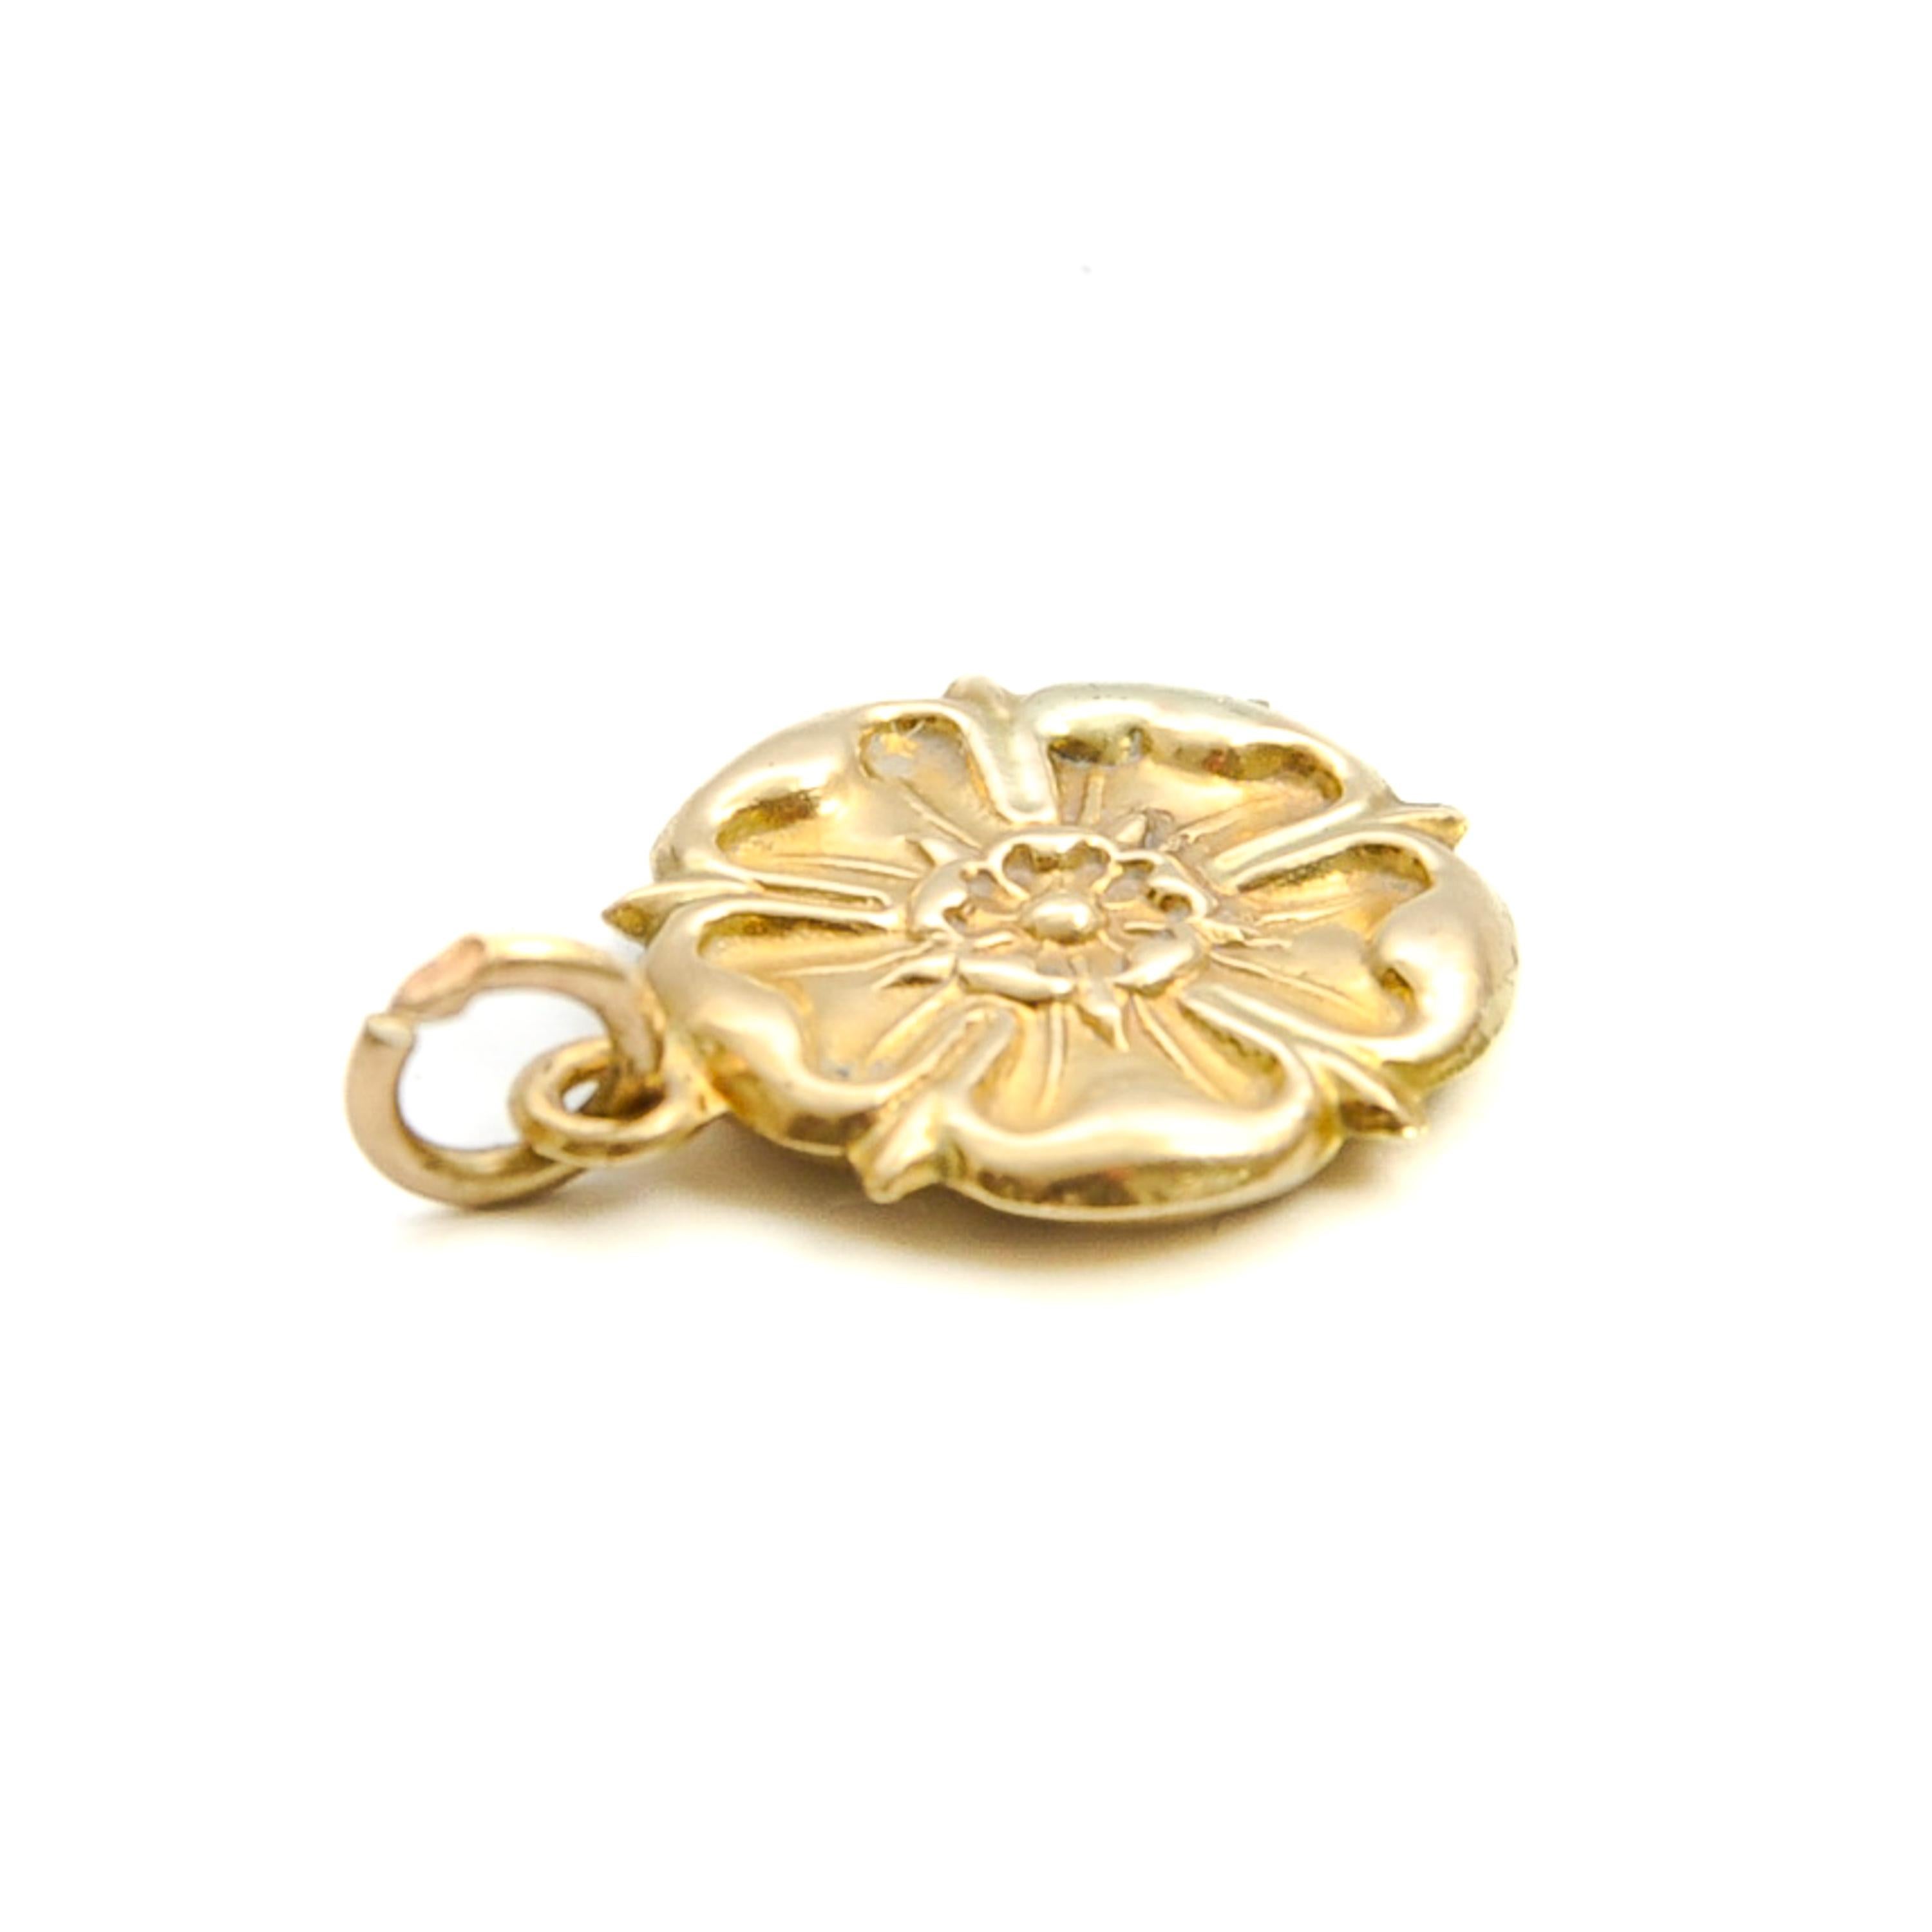 Vintage 9K Gold Tudor Rose Charm Pendant In Good Condition For Sale In Rotterdam, NL